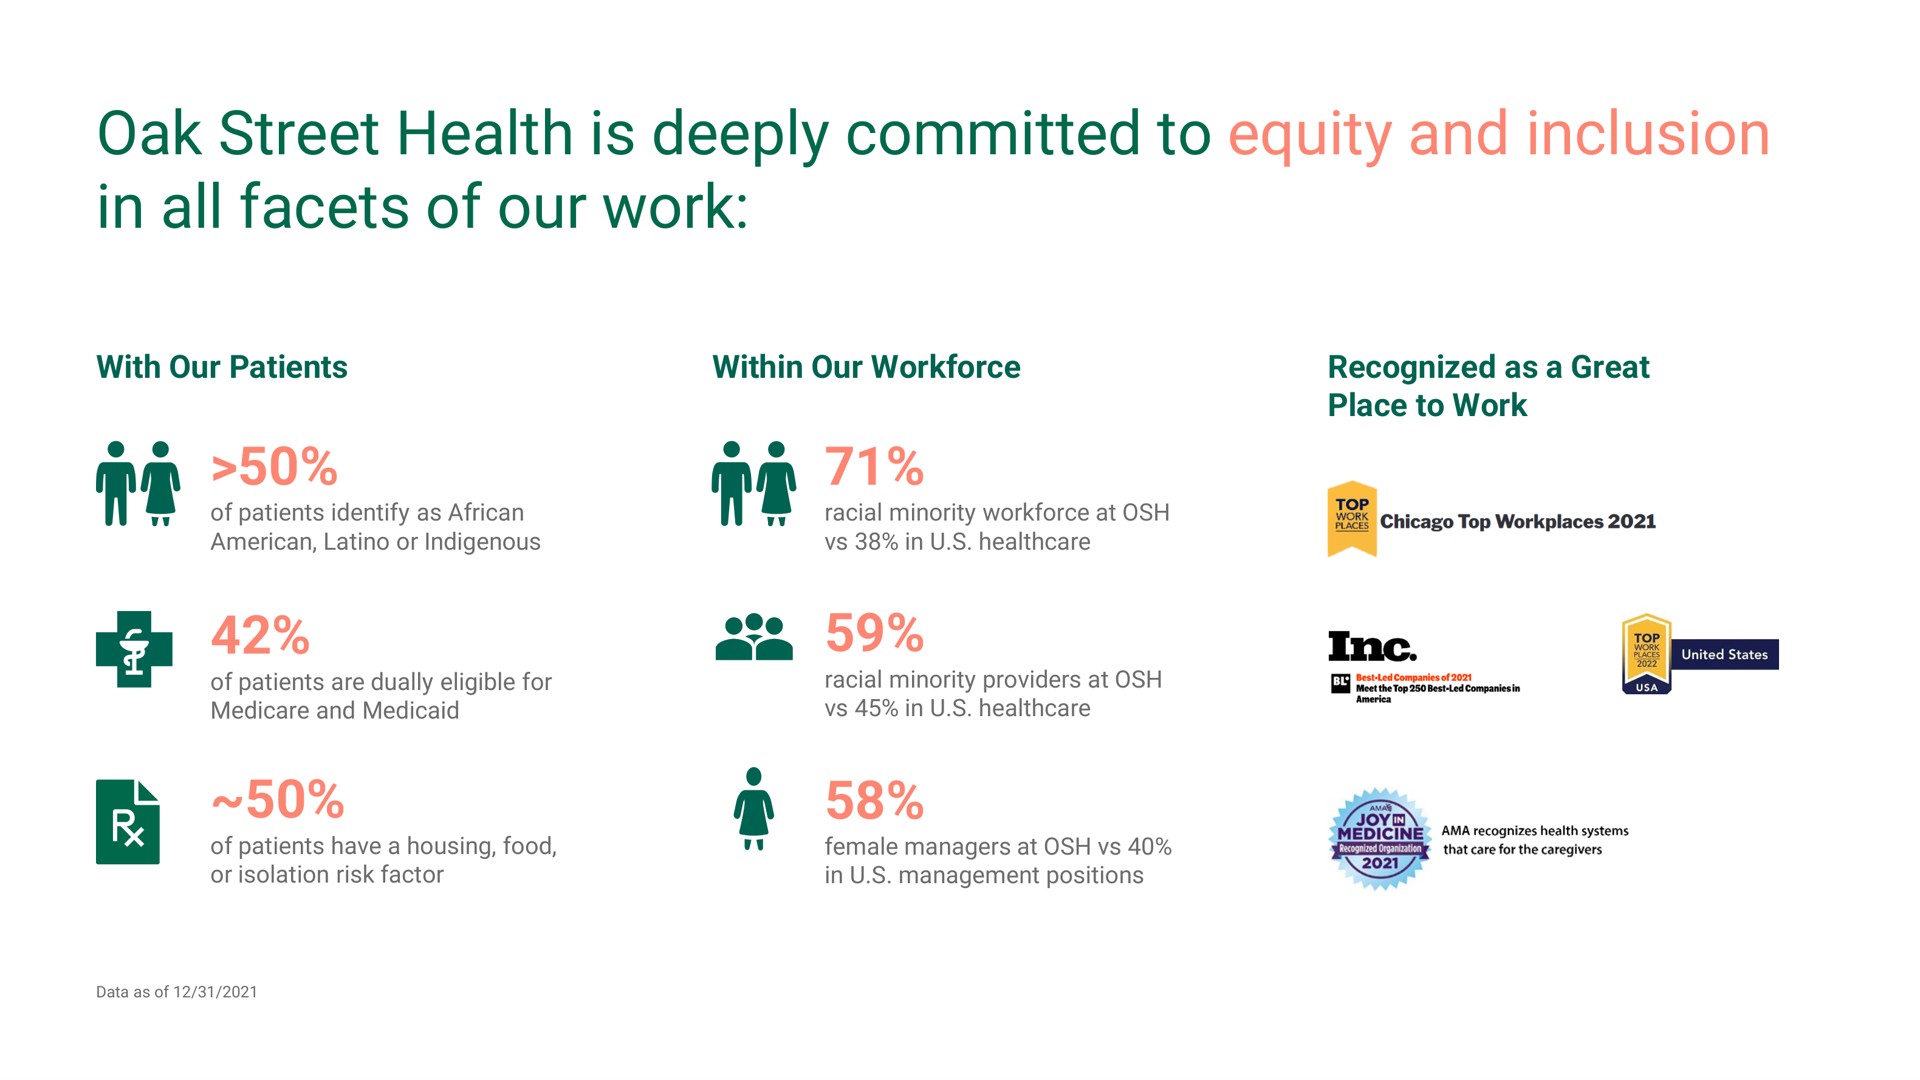 oak street health is deeply committed to equity and inclusion in all facets of our work | Oak Street Health